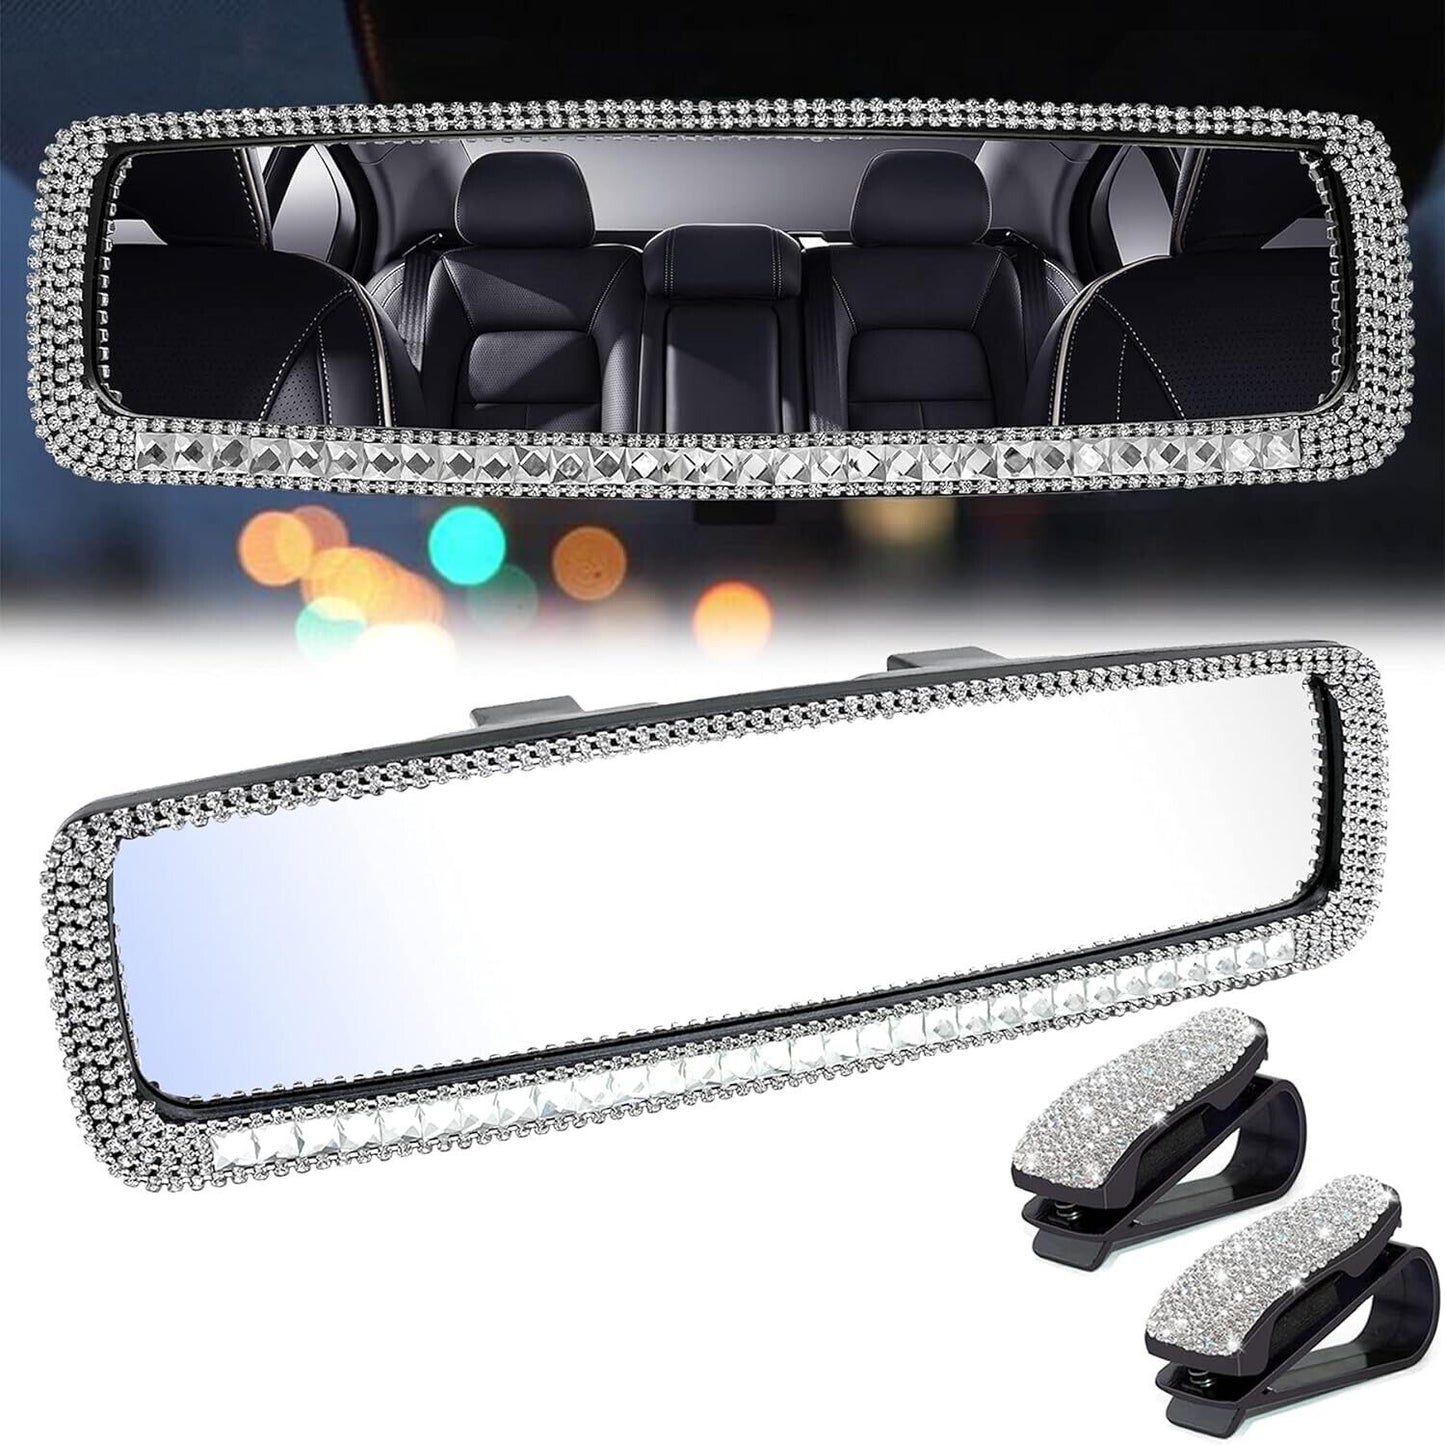 Bling Car Rearview Mirror with HD Glass - Rhinestone Decor, Universal Fit, White